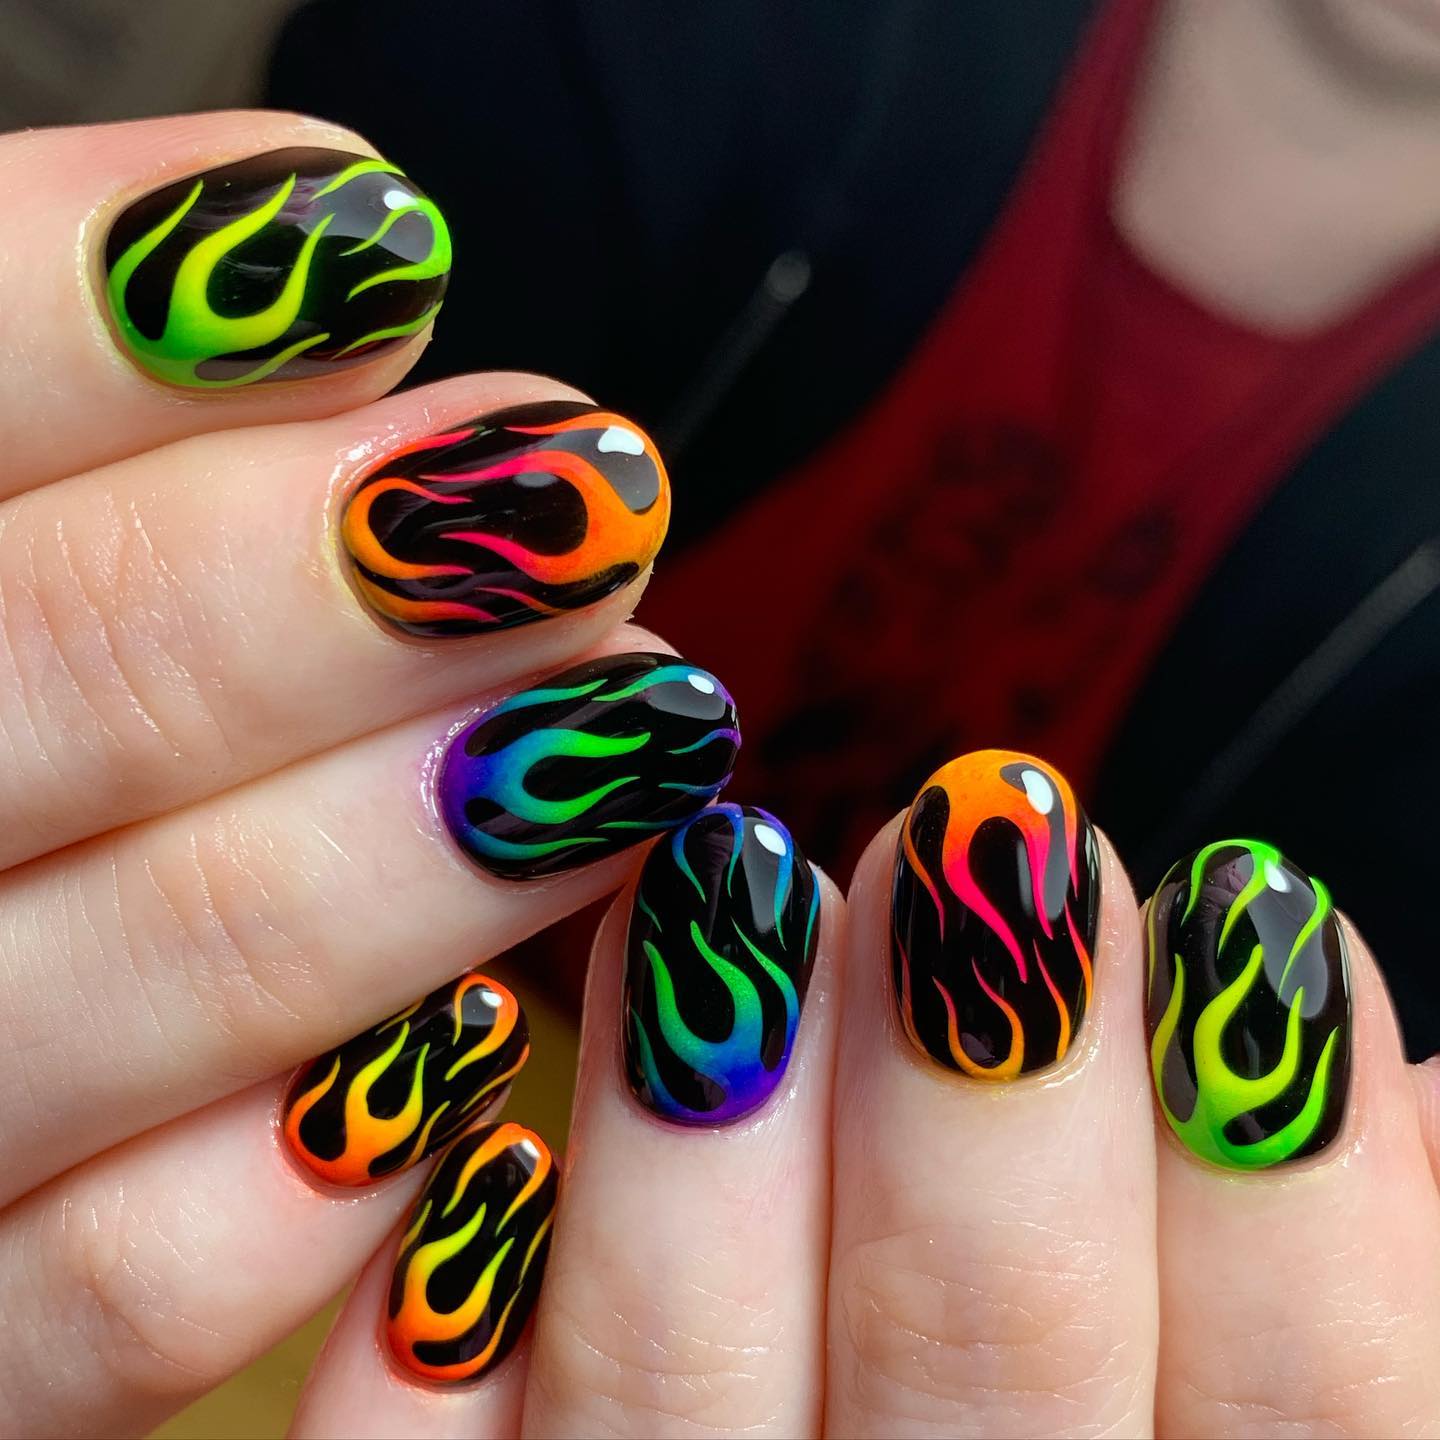 What's the best way to make neon flames stand out more on your nails? The answer is applying a black nail polish as a base. Flames of varied neon colors are quite eye-catching, so everyone will notice your nails.